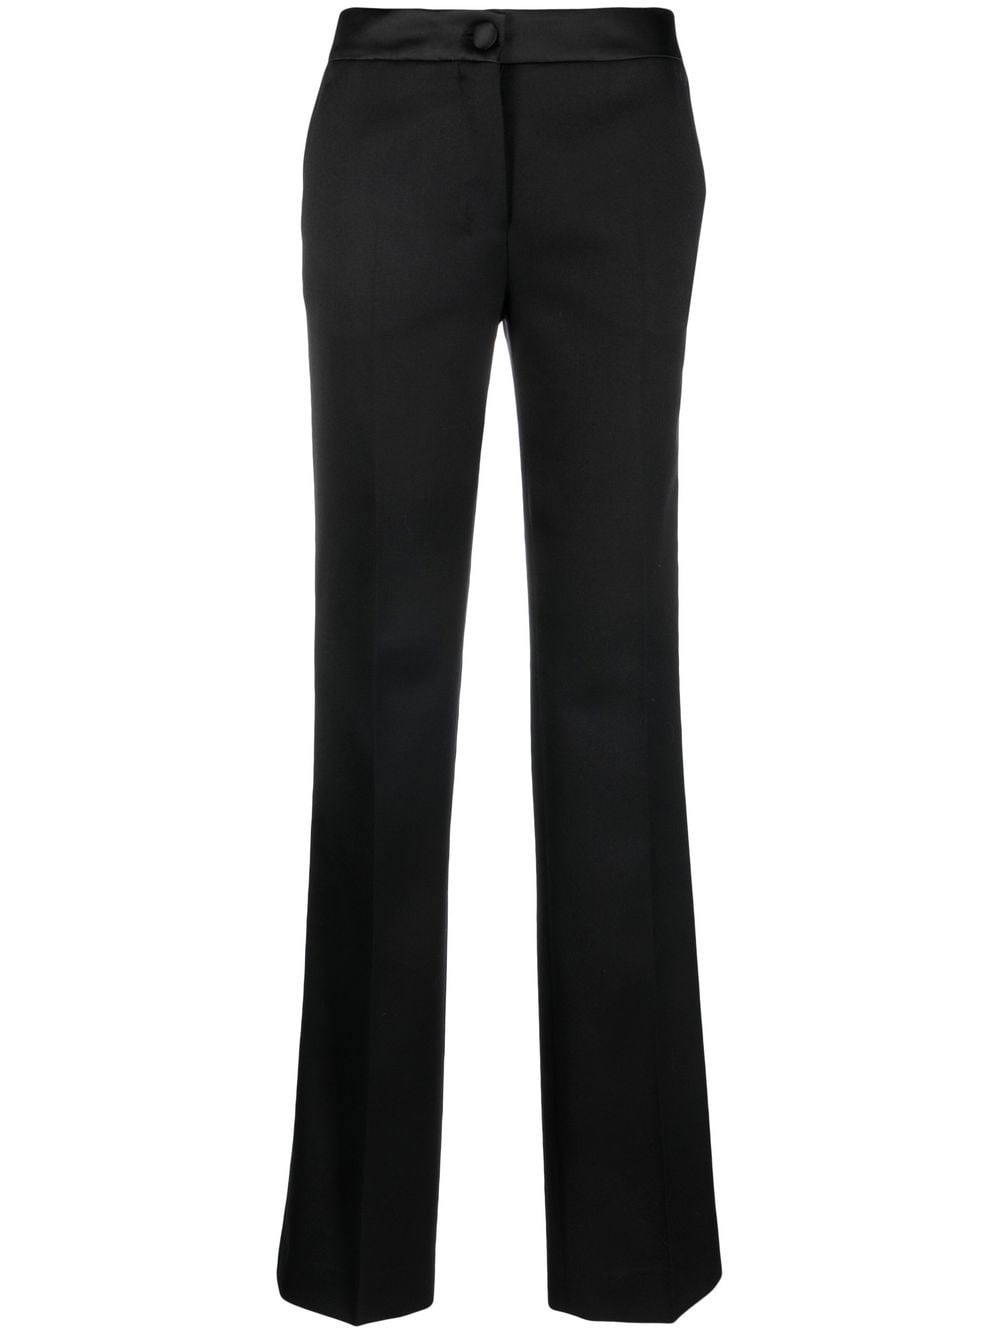 four-stitch tailored tuxedo trousers - 1